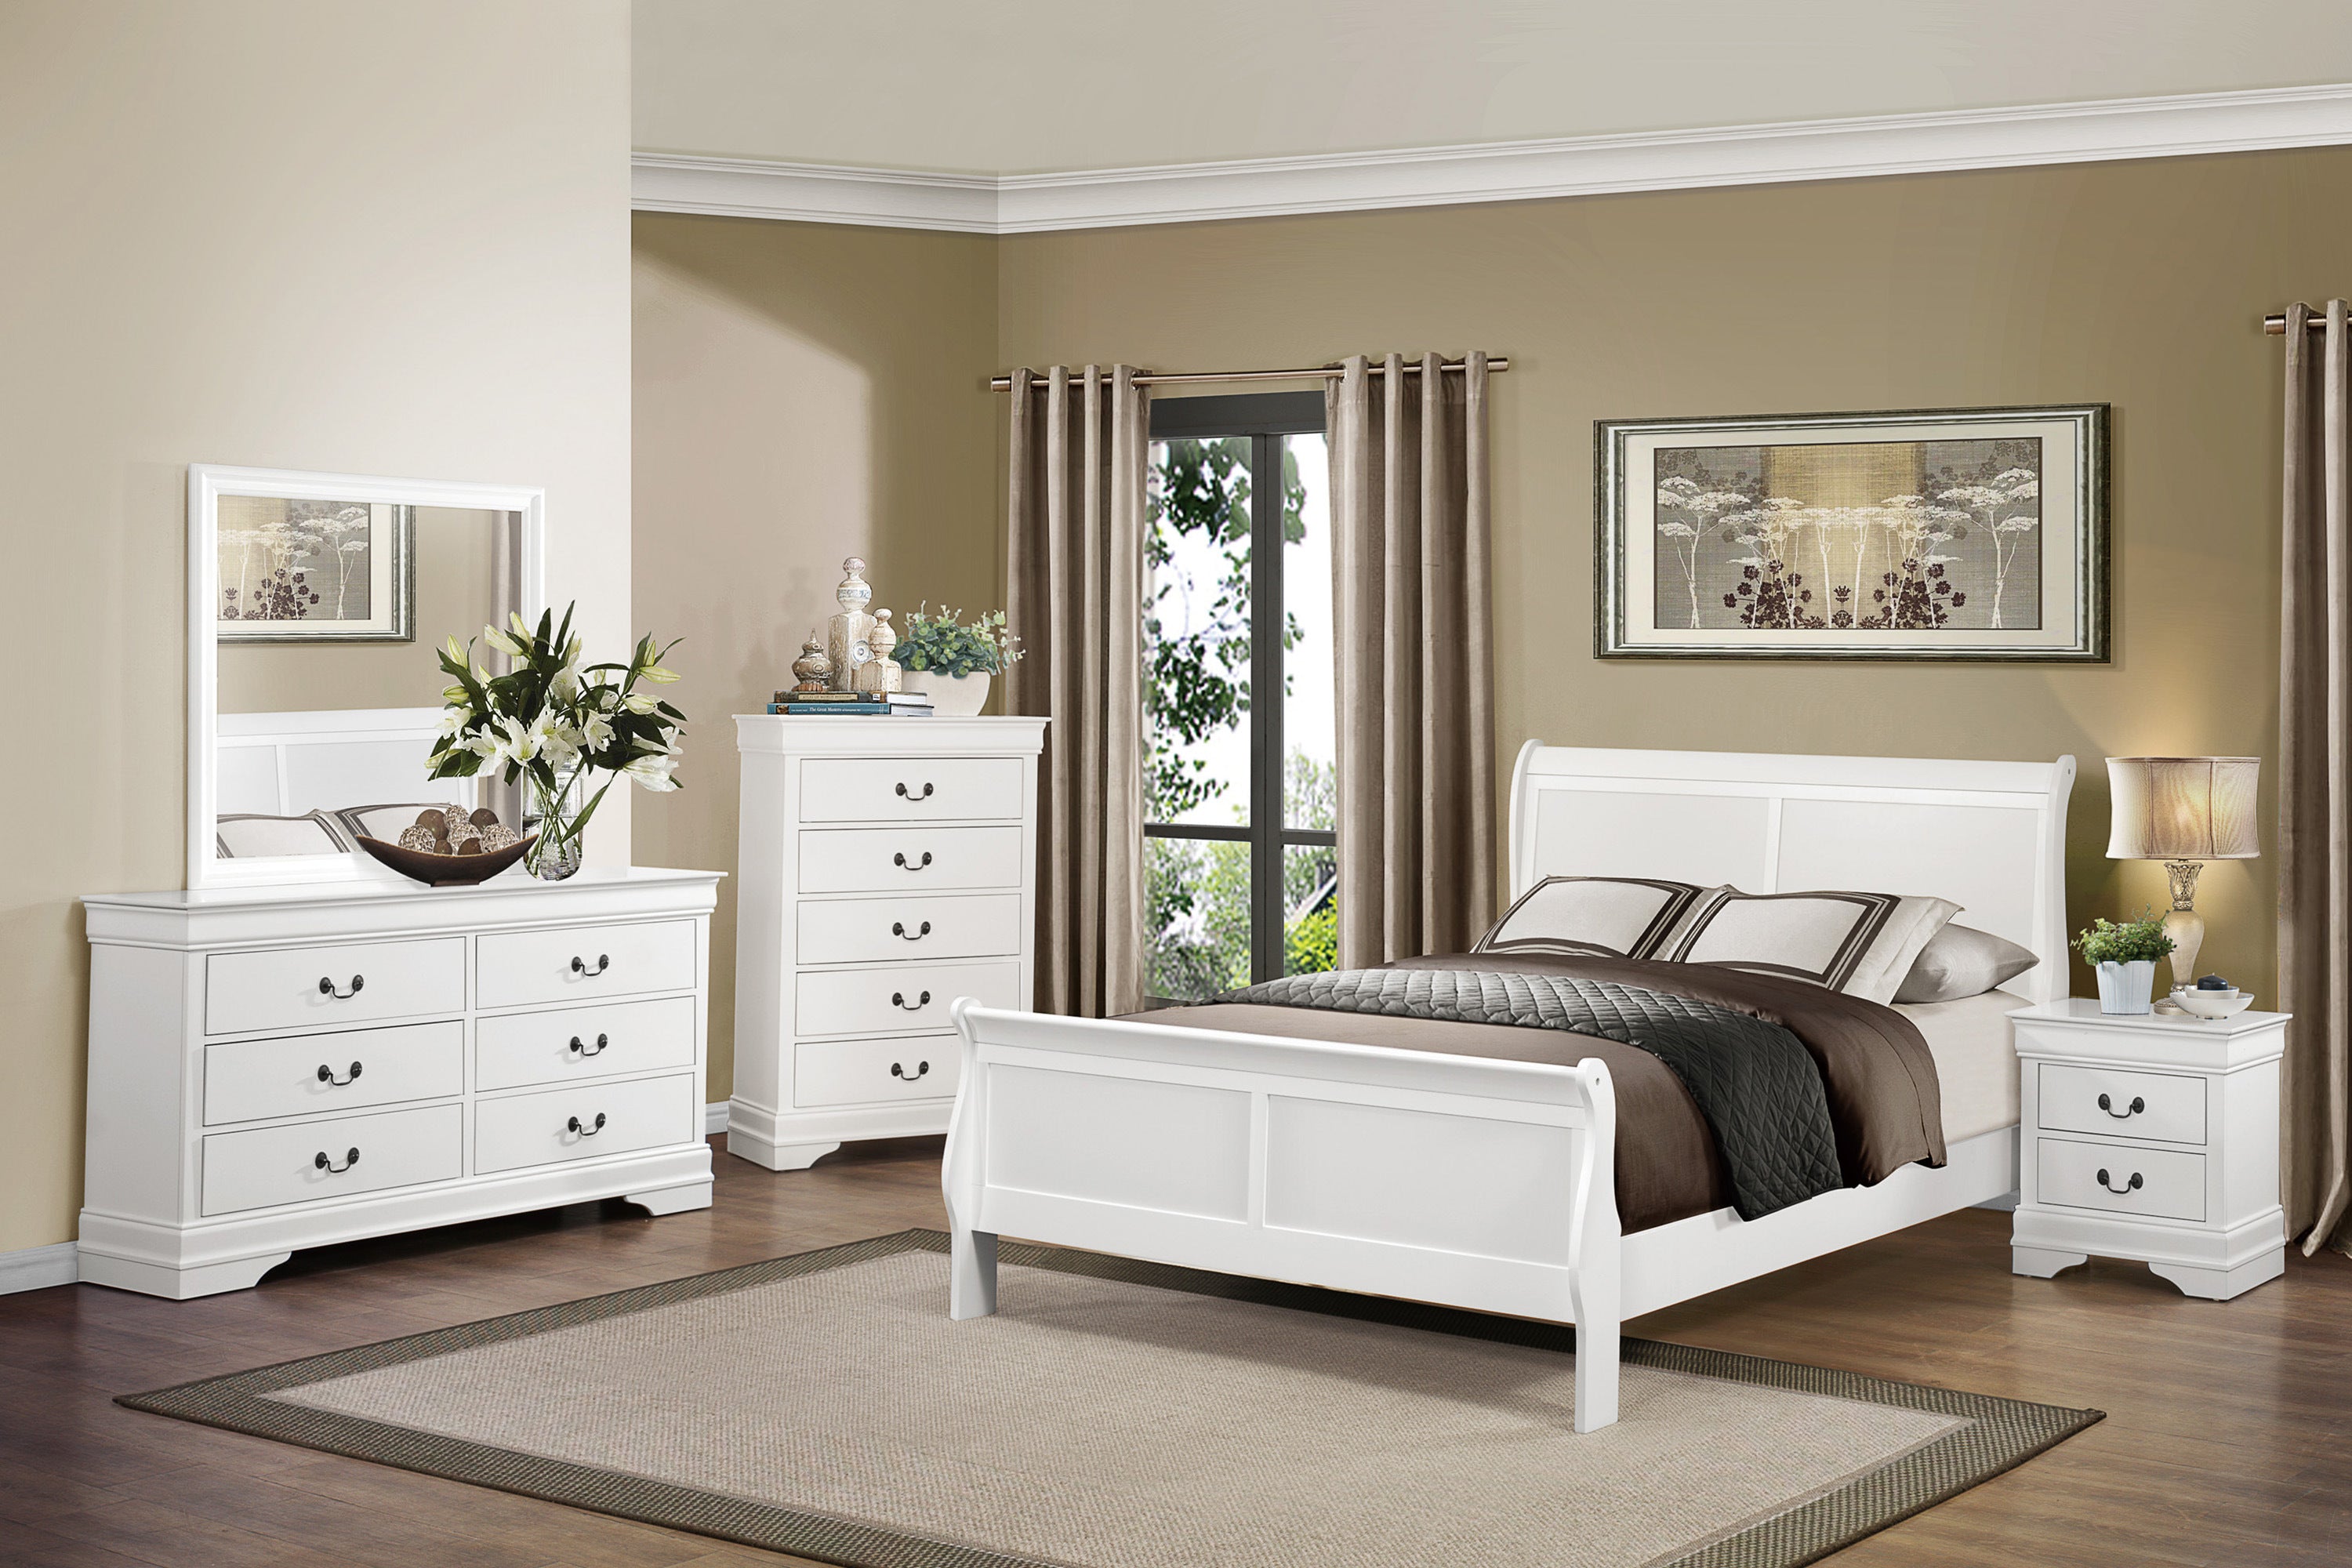 ZNTS Traditional Design White Finish 1pc Chest of 5 Drawers Antique Drop Handles Drawers Bedroom B01149270